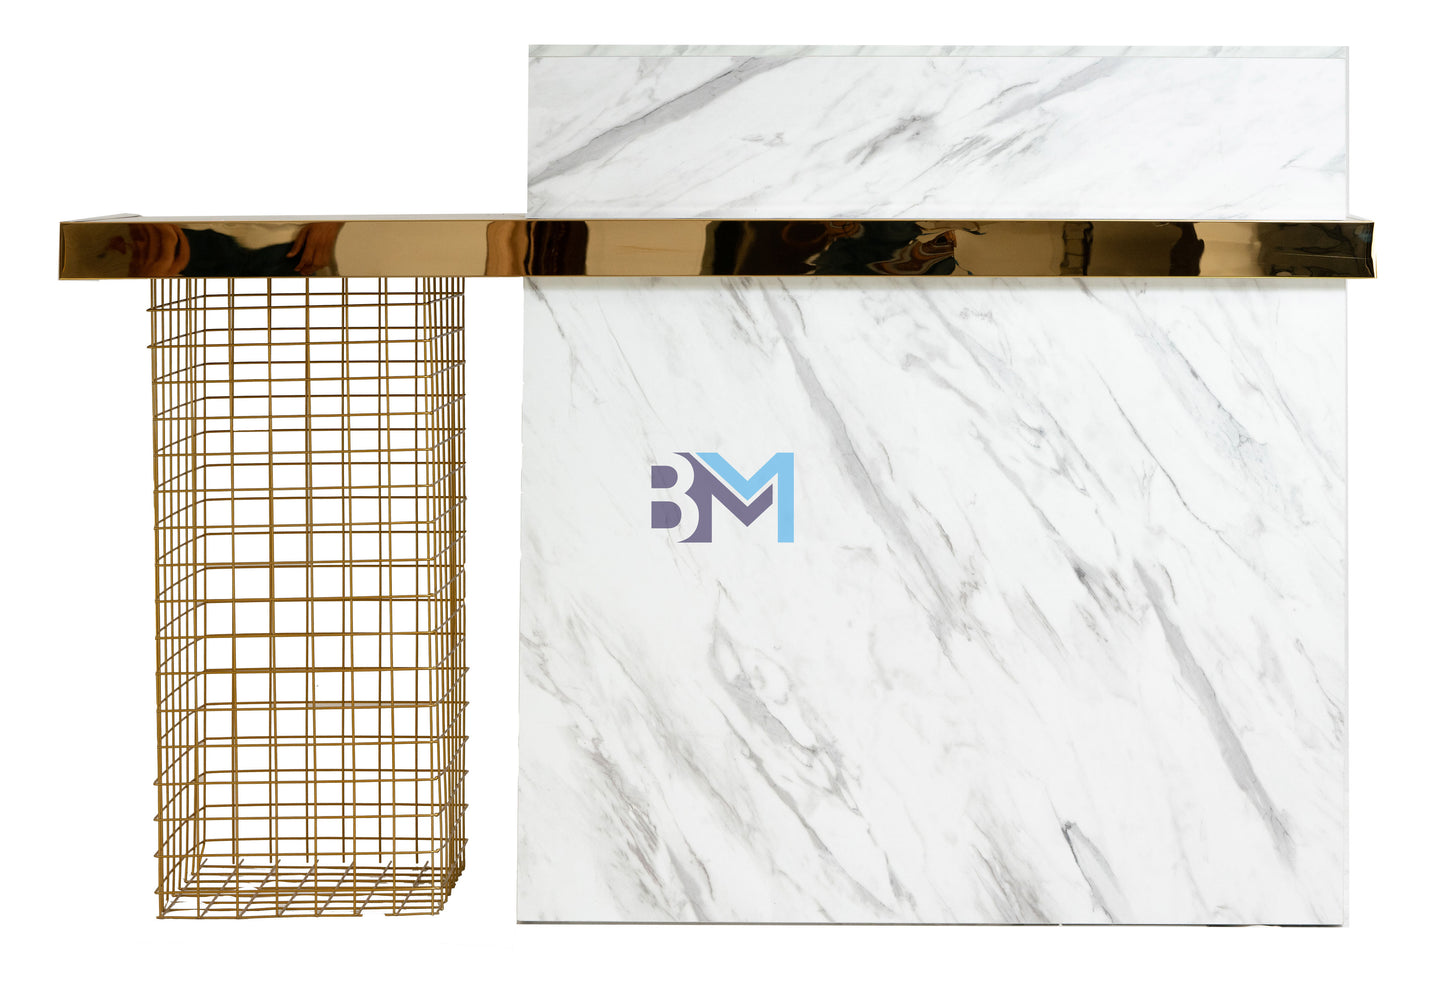 White and gray marble type reception desk with gold